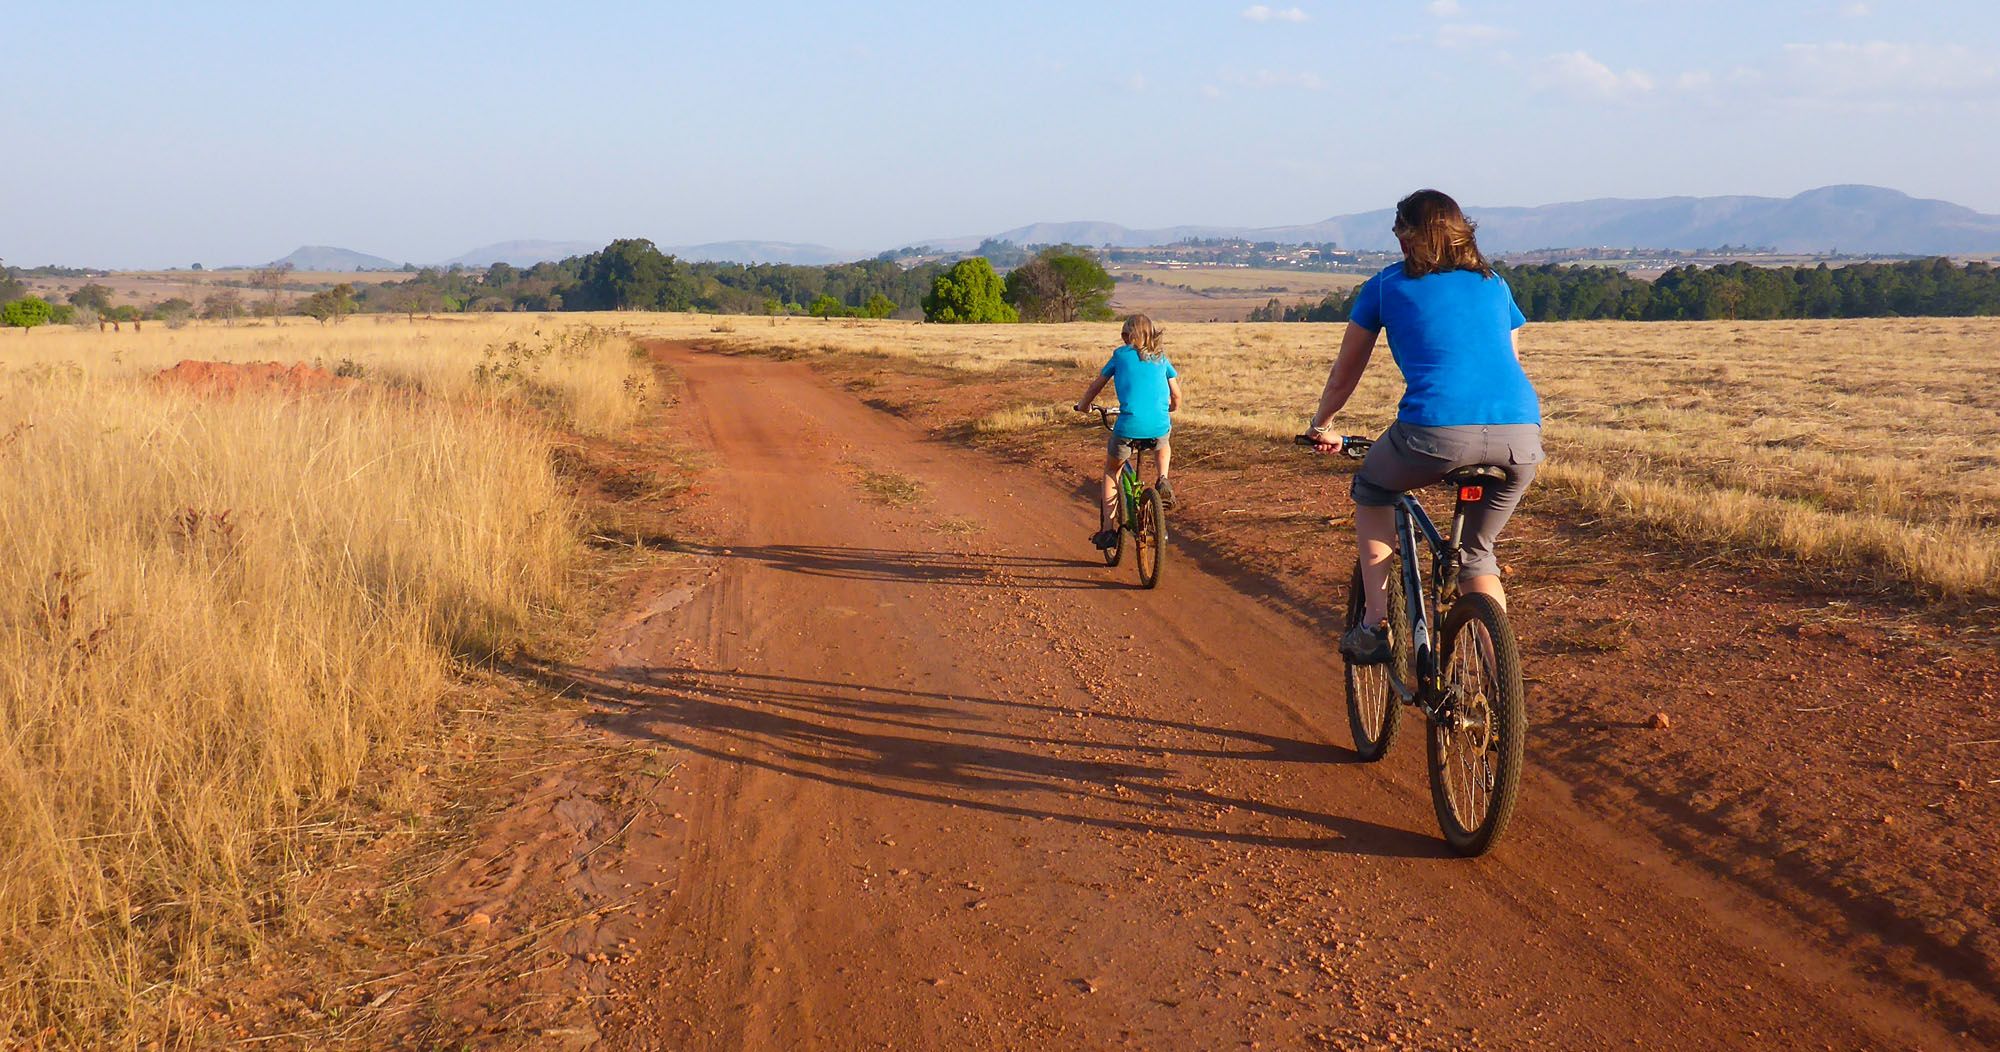 Featured image for “Cycling with Zebras in Eswatini”